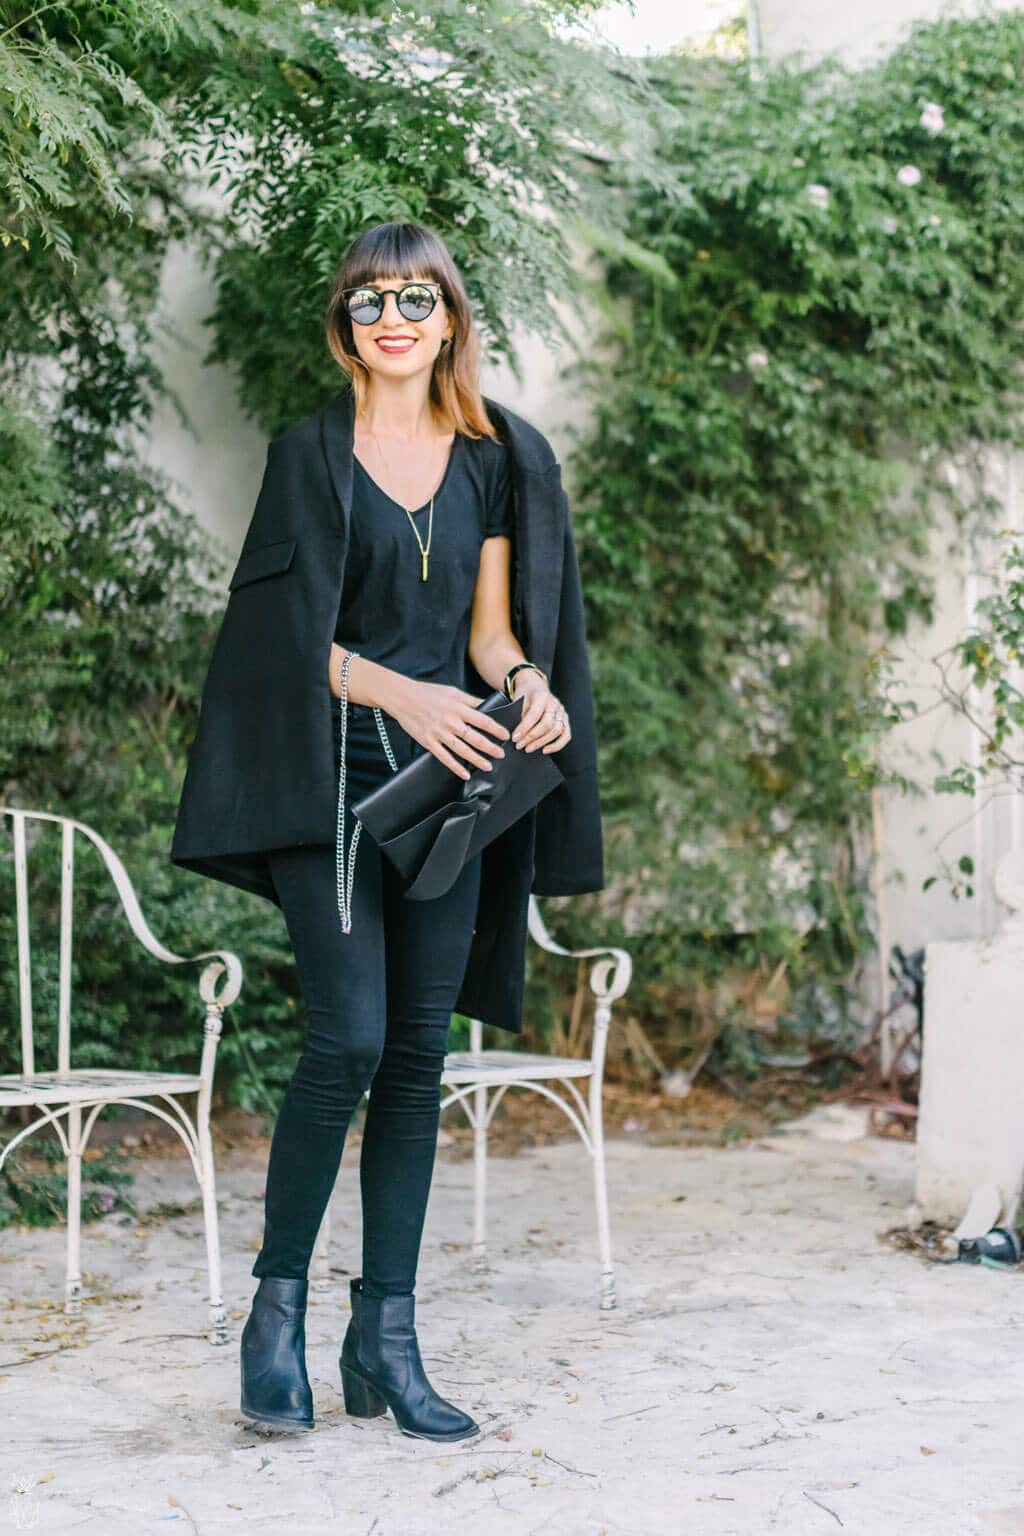 Outfit : Head-to-Toe Black - Outfit inspiration for winter | Fashion minimalist